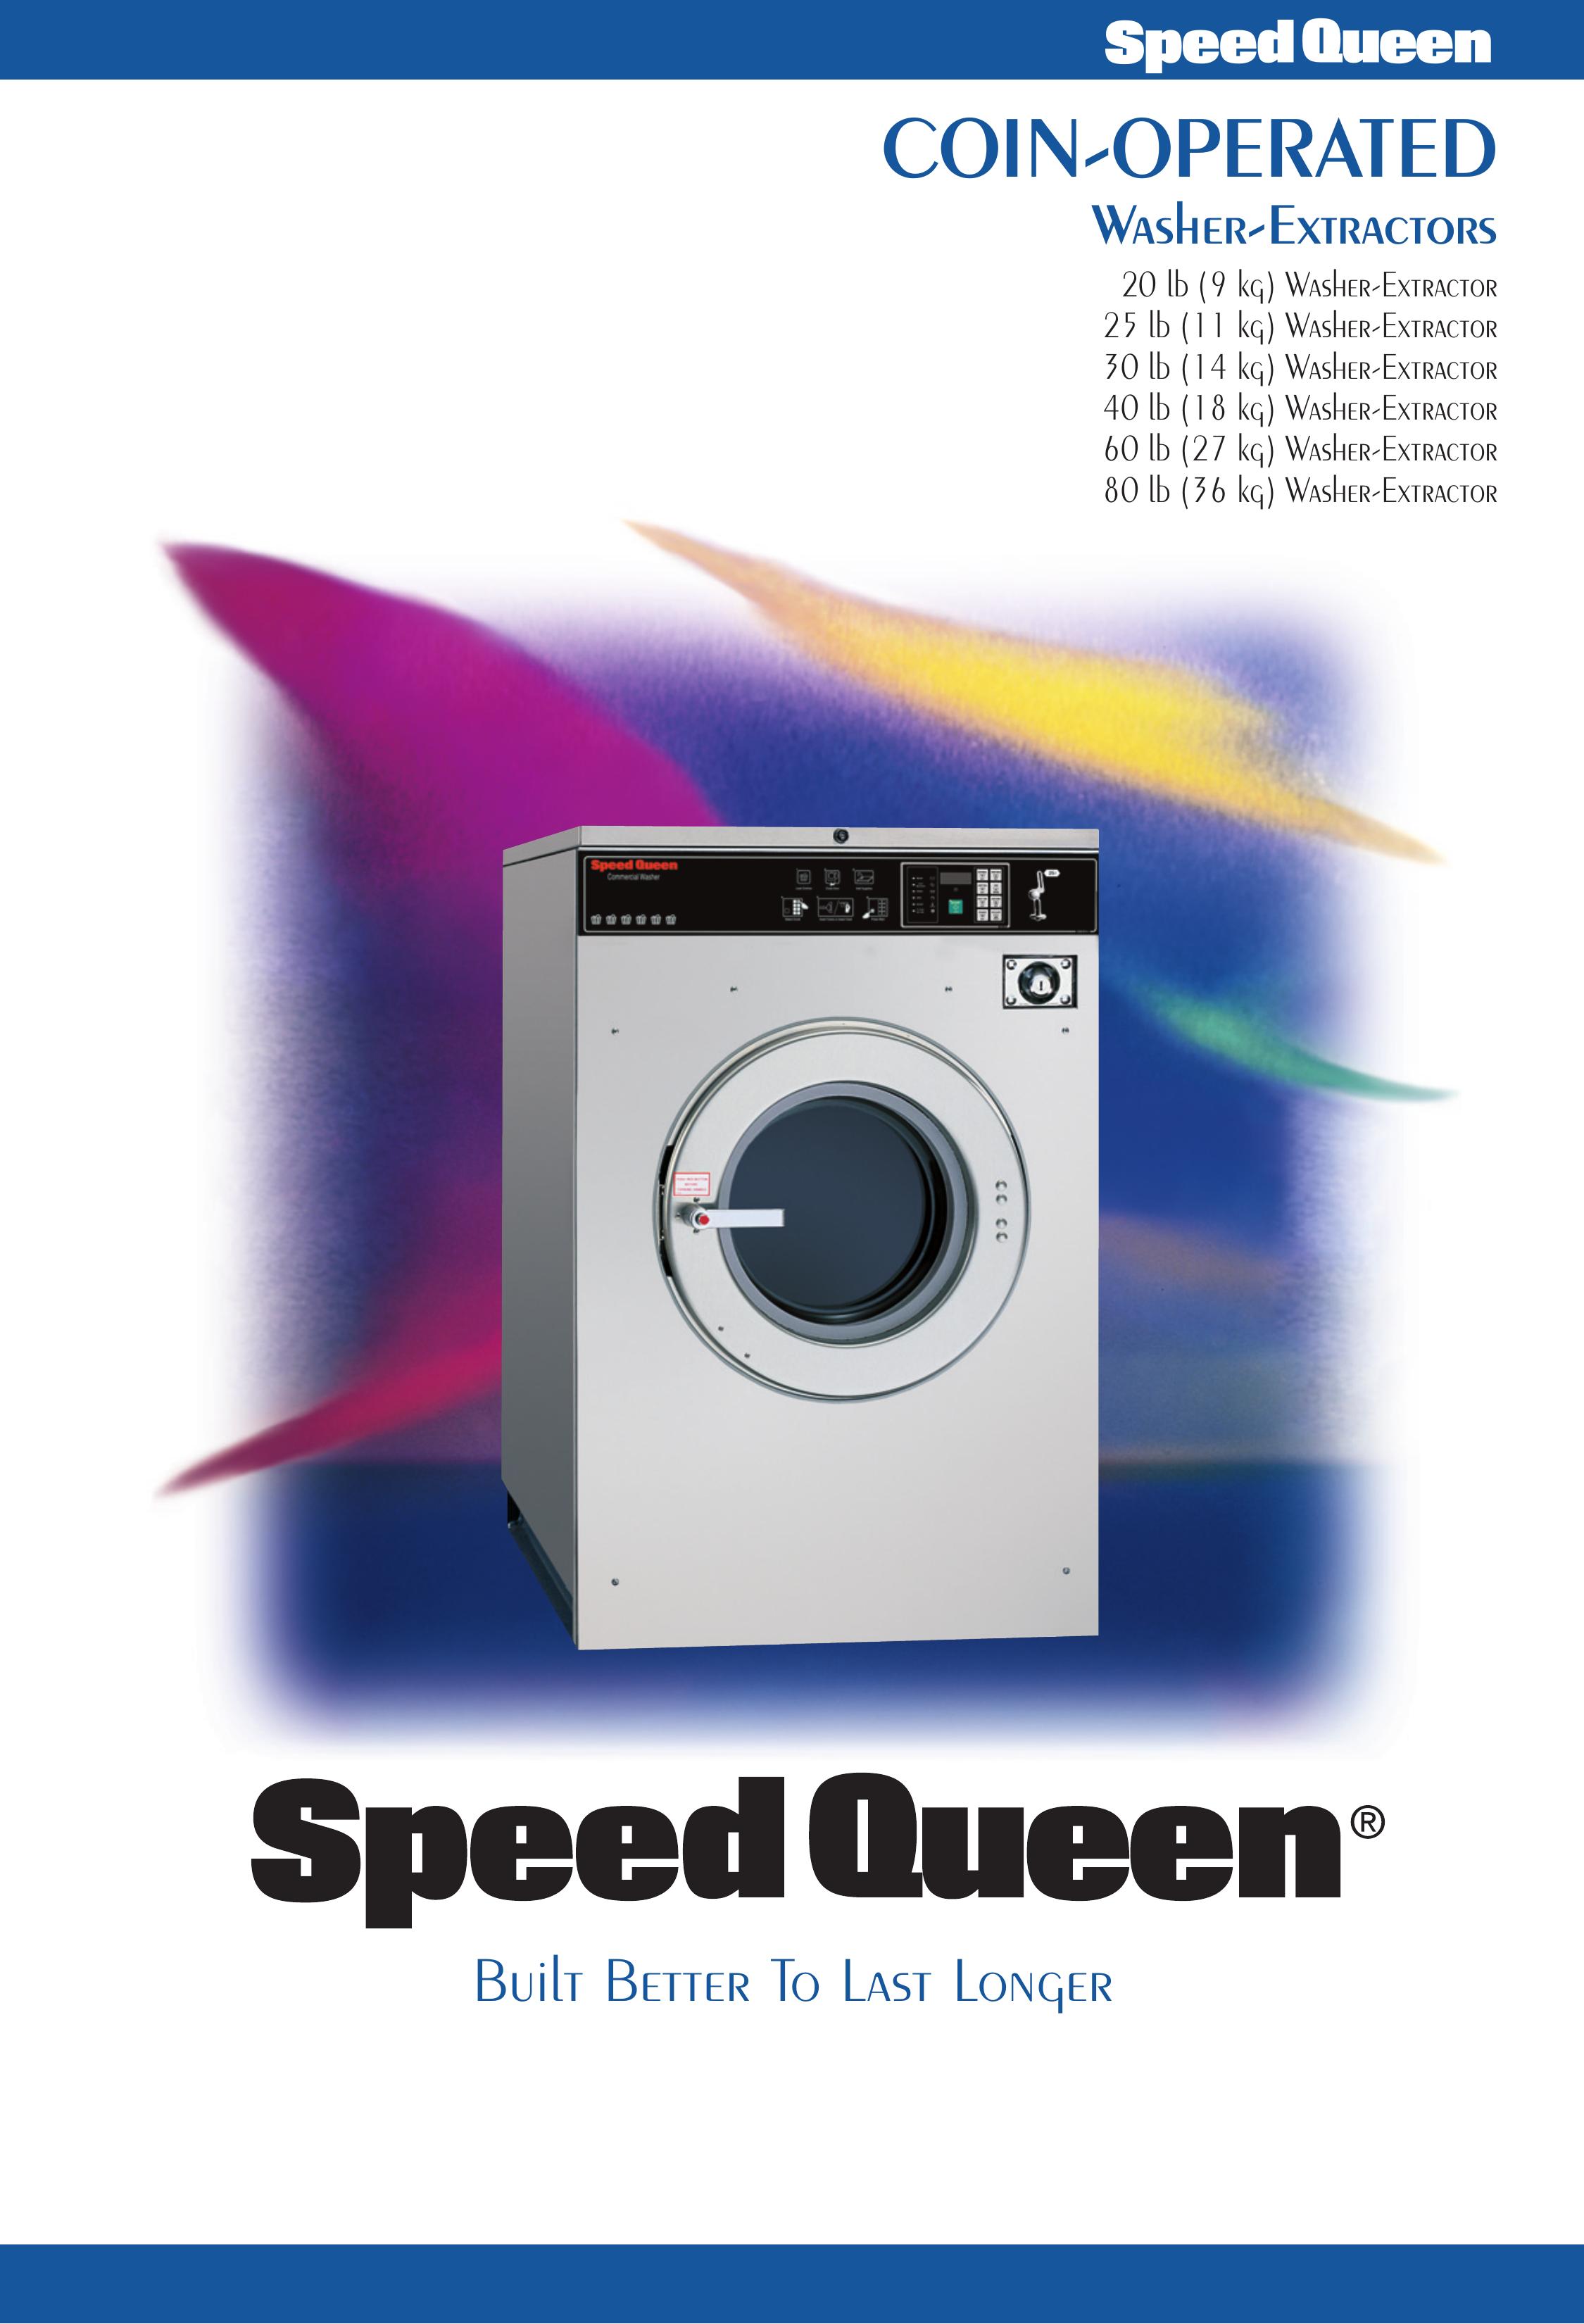 Speed Queen 40 lb Washer User Manual